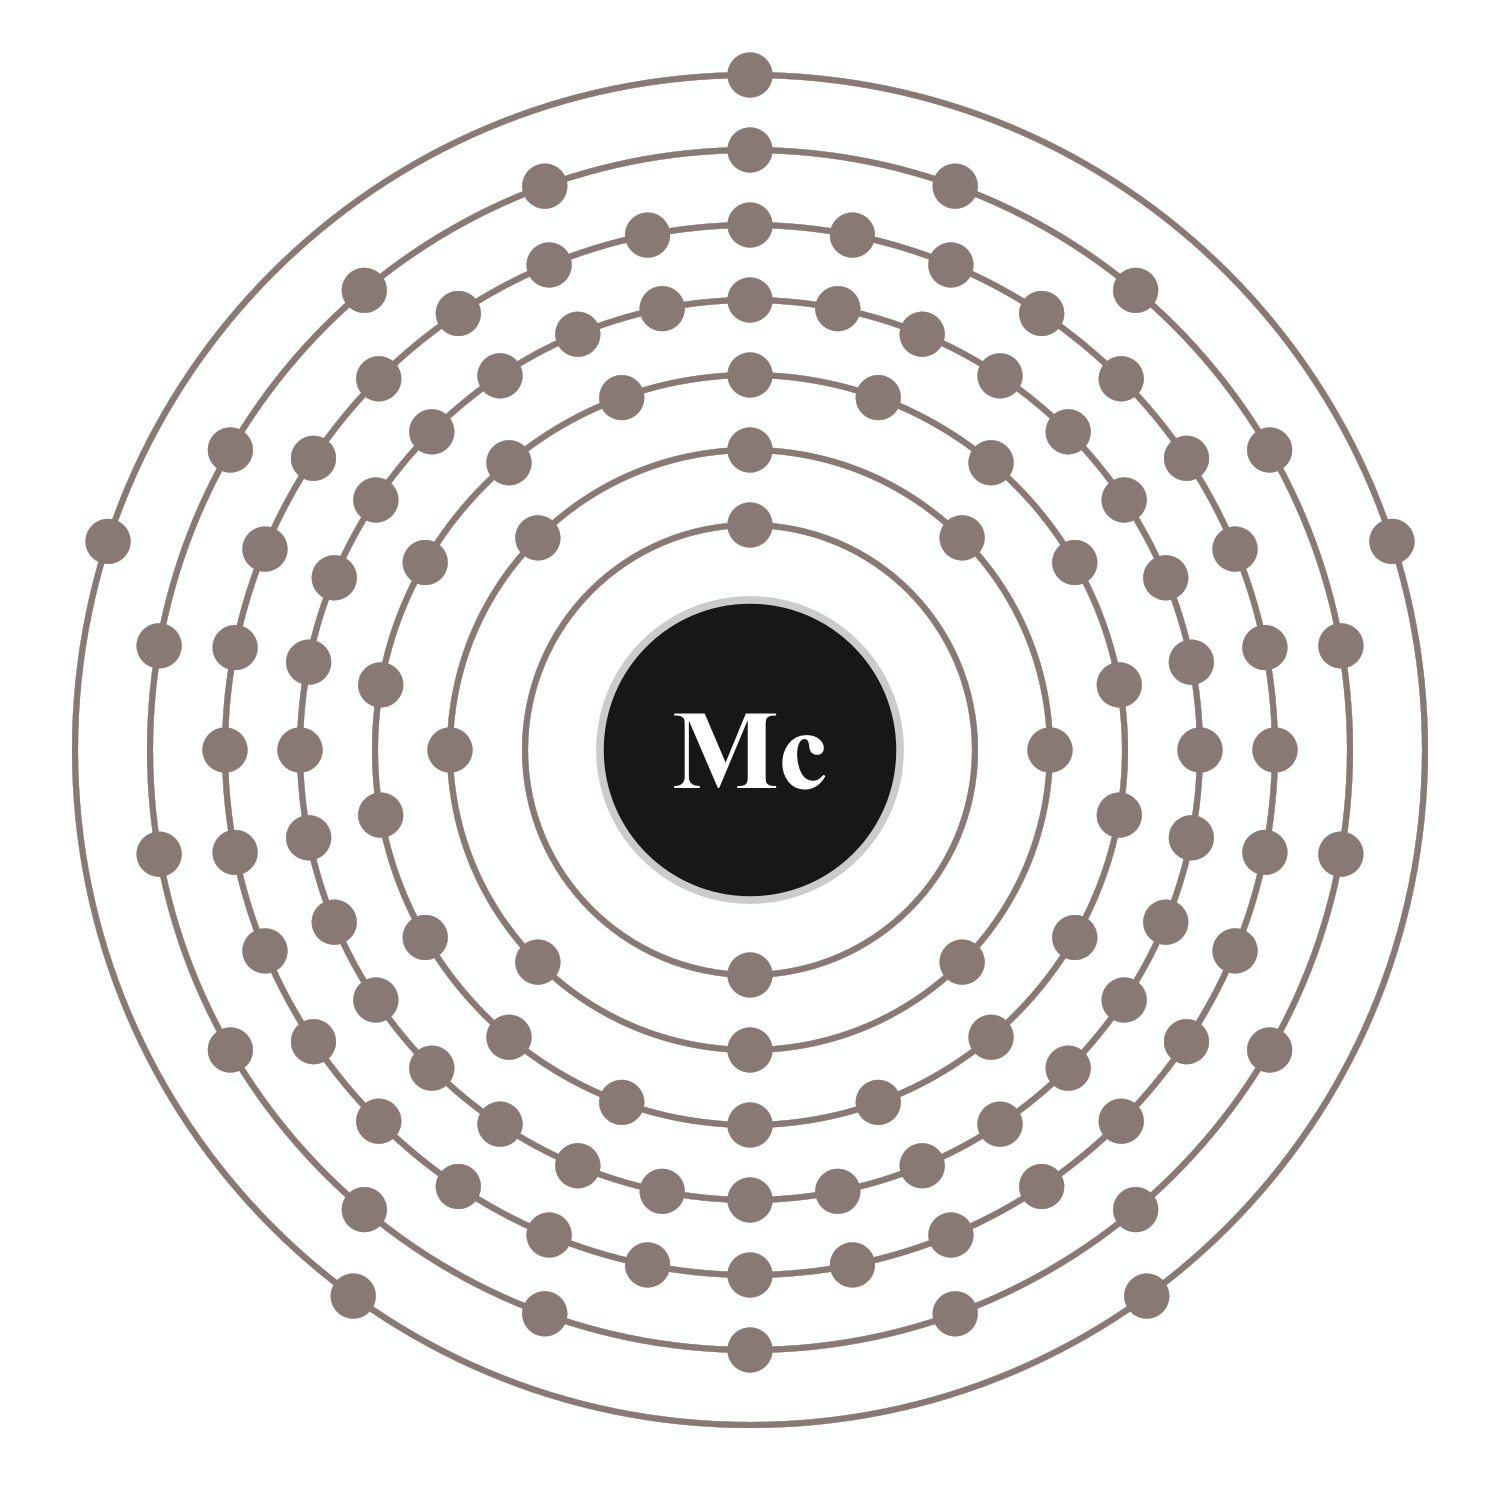 Image - A diagram of the electron shell for moscovium. (Credit: Greg Robson/Wikimedia Commons)